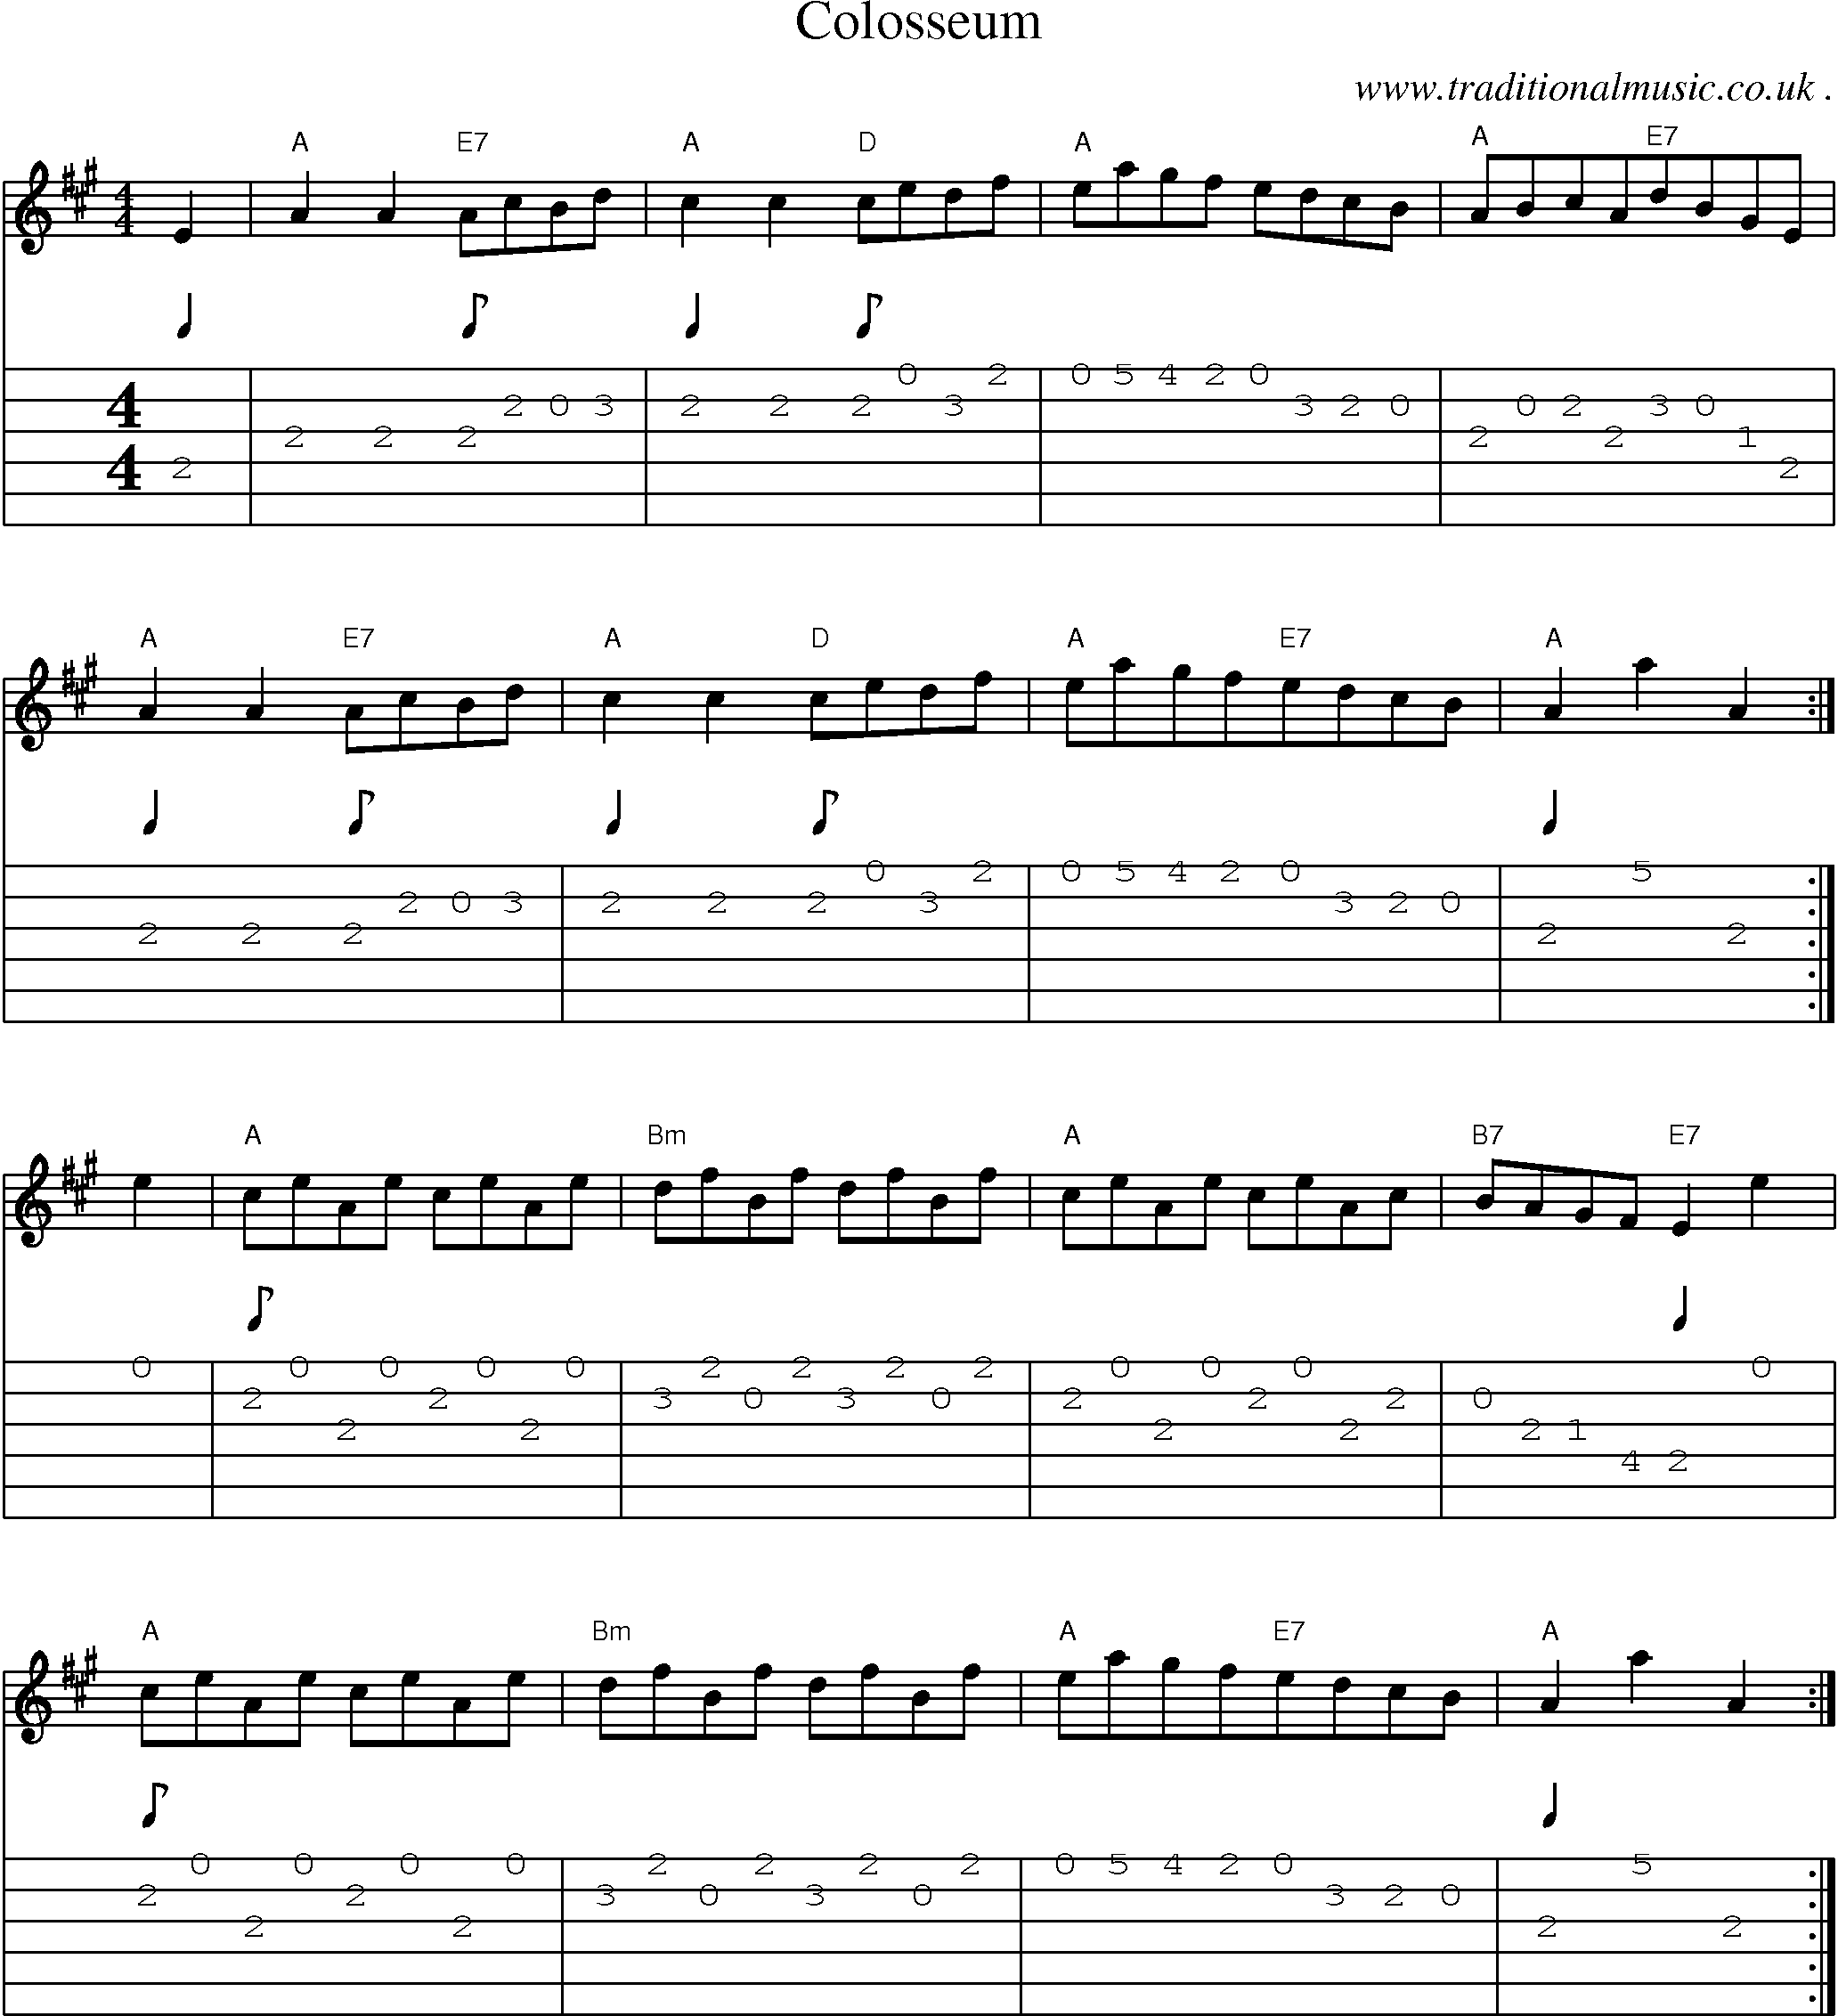 Sheet-Music and Guitar Tabs for Colosseum